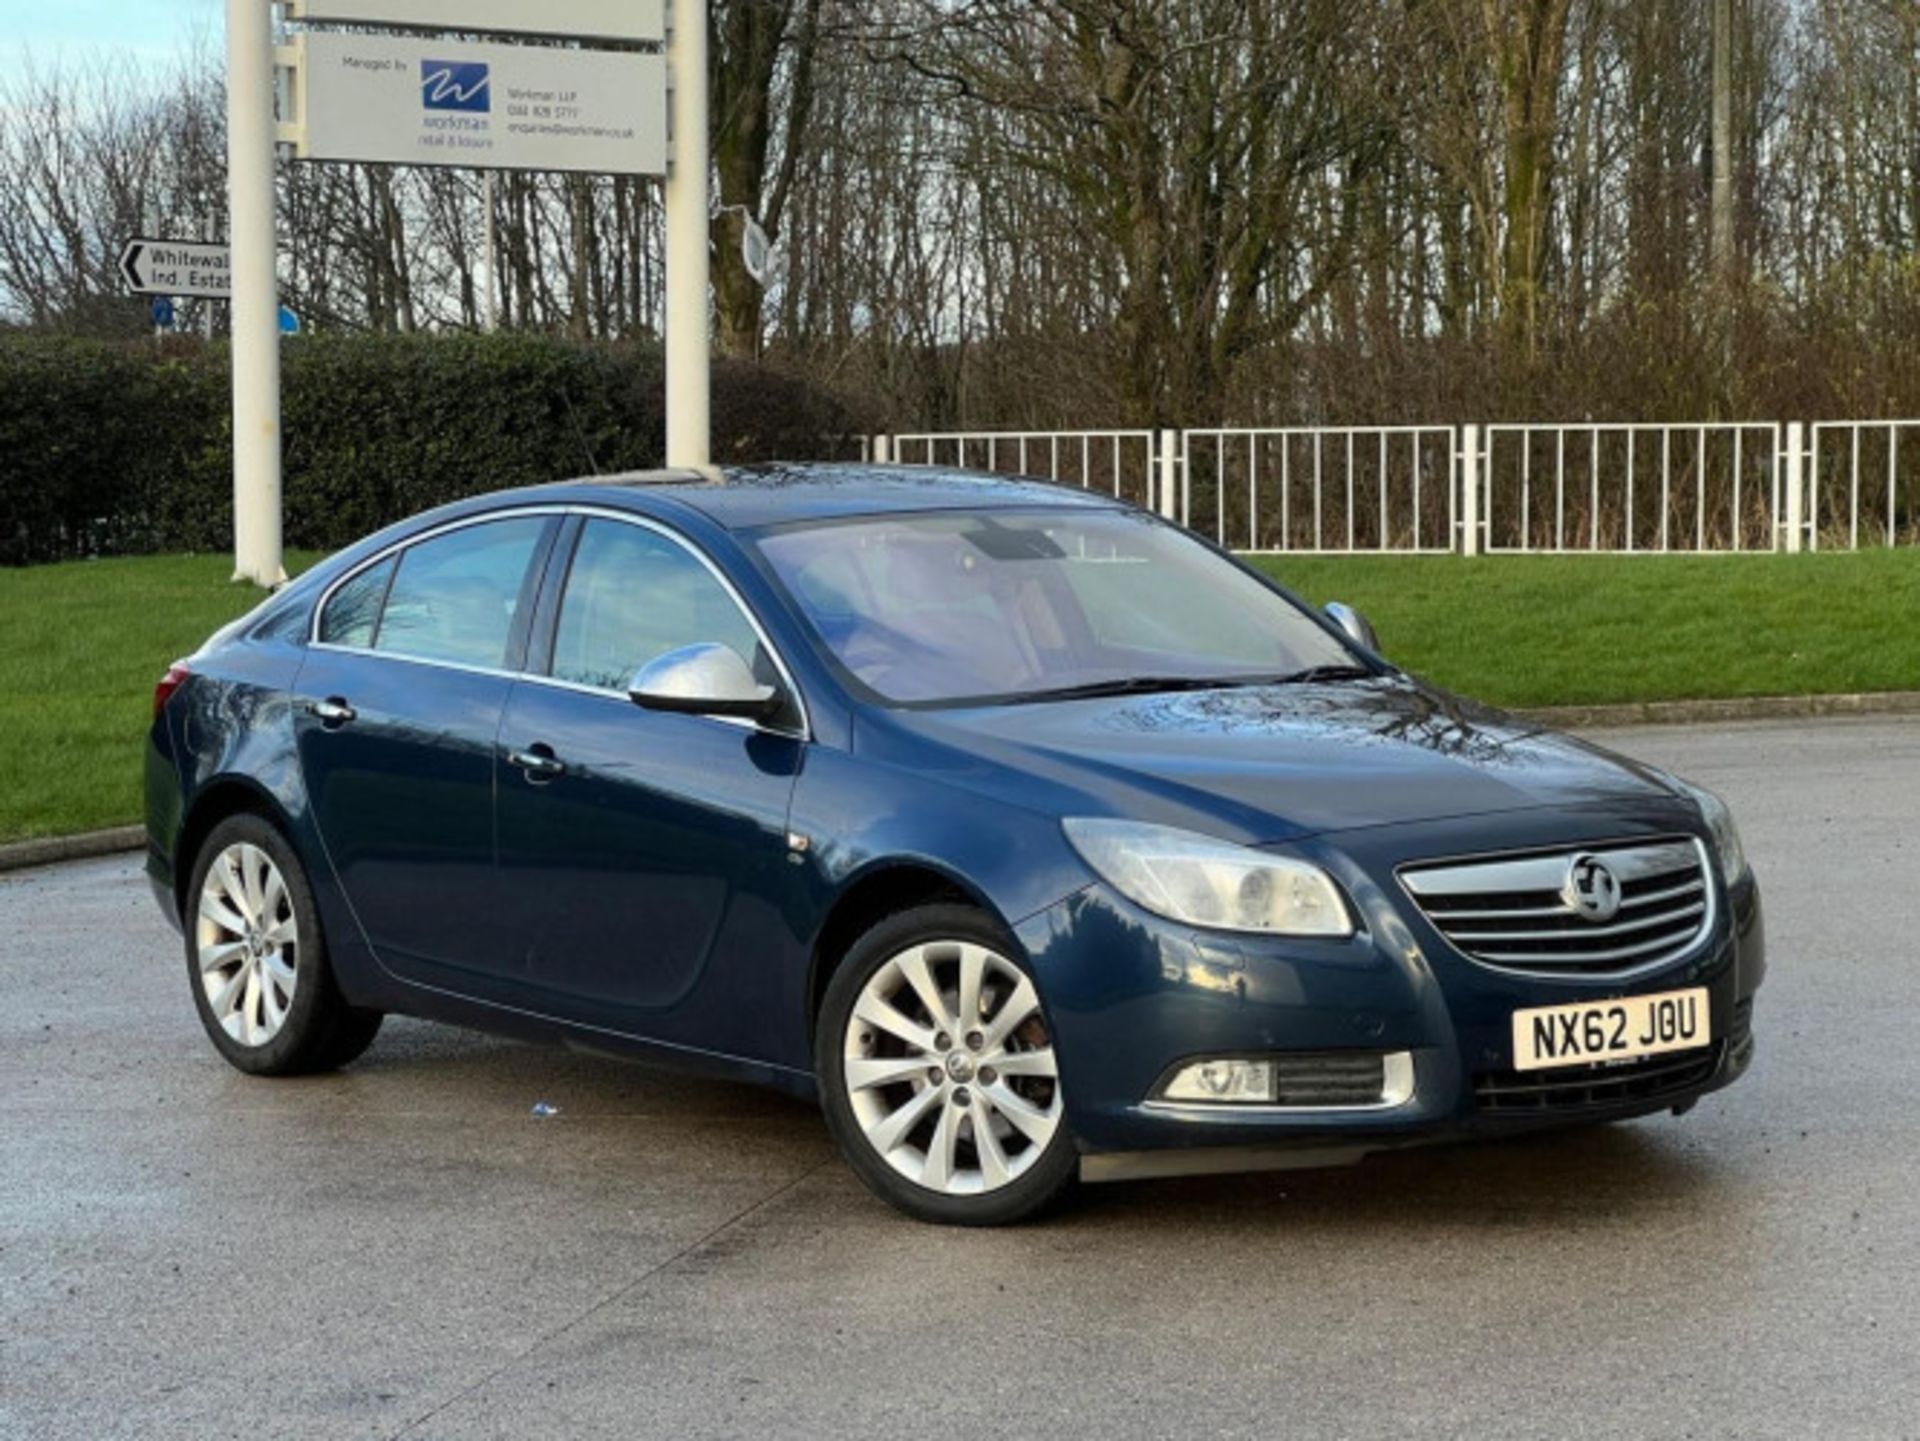 2012 VAUXHALL INSIGNIA 2.0 CDTI ELITE AUTO EURO 5 - DISCOVER EXCELLENCE >>--NO VAT ON HAMMER--<< - Image 78 of 79